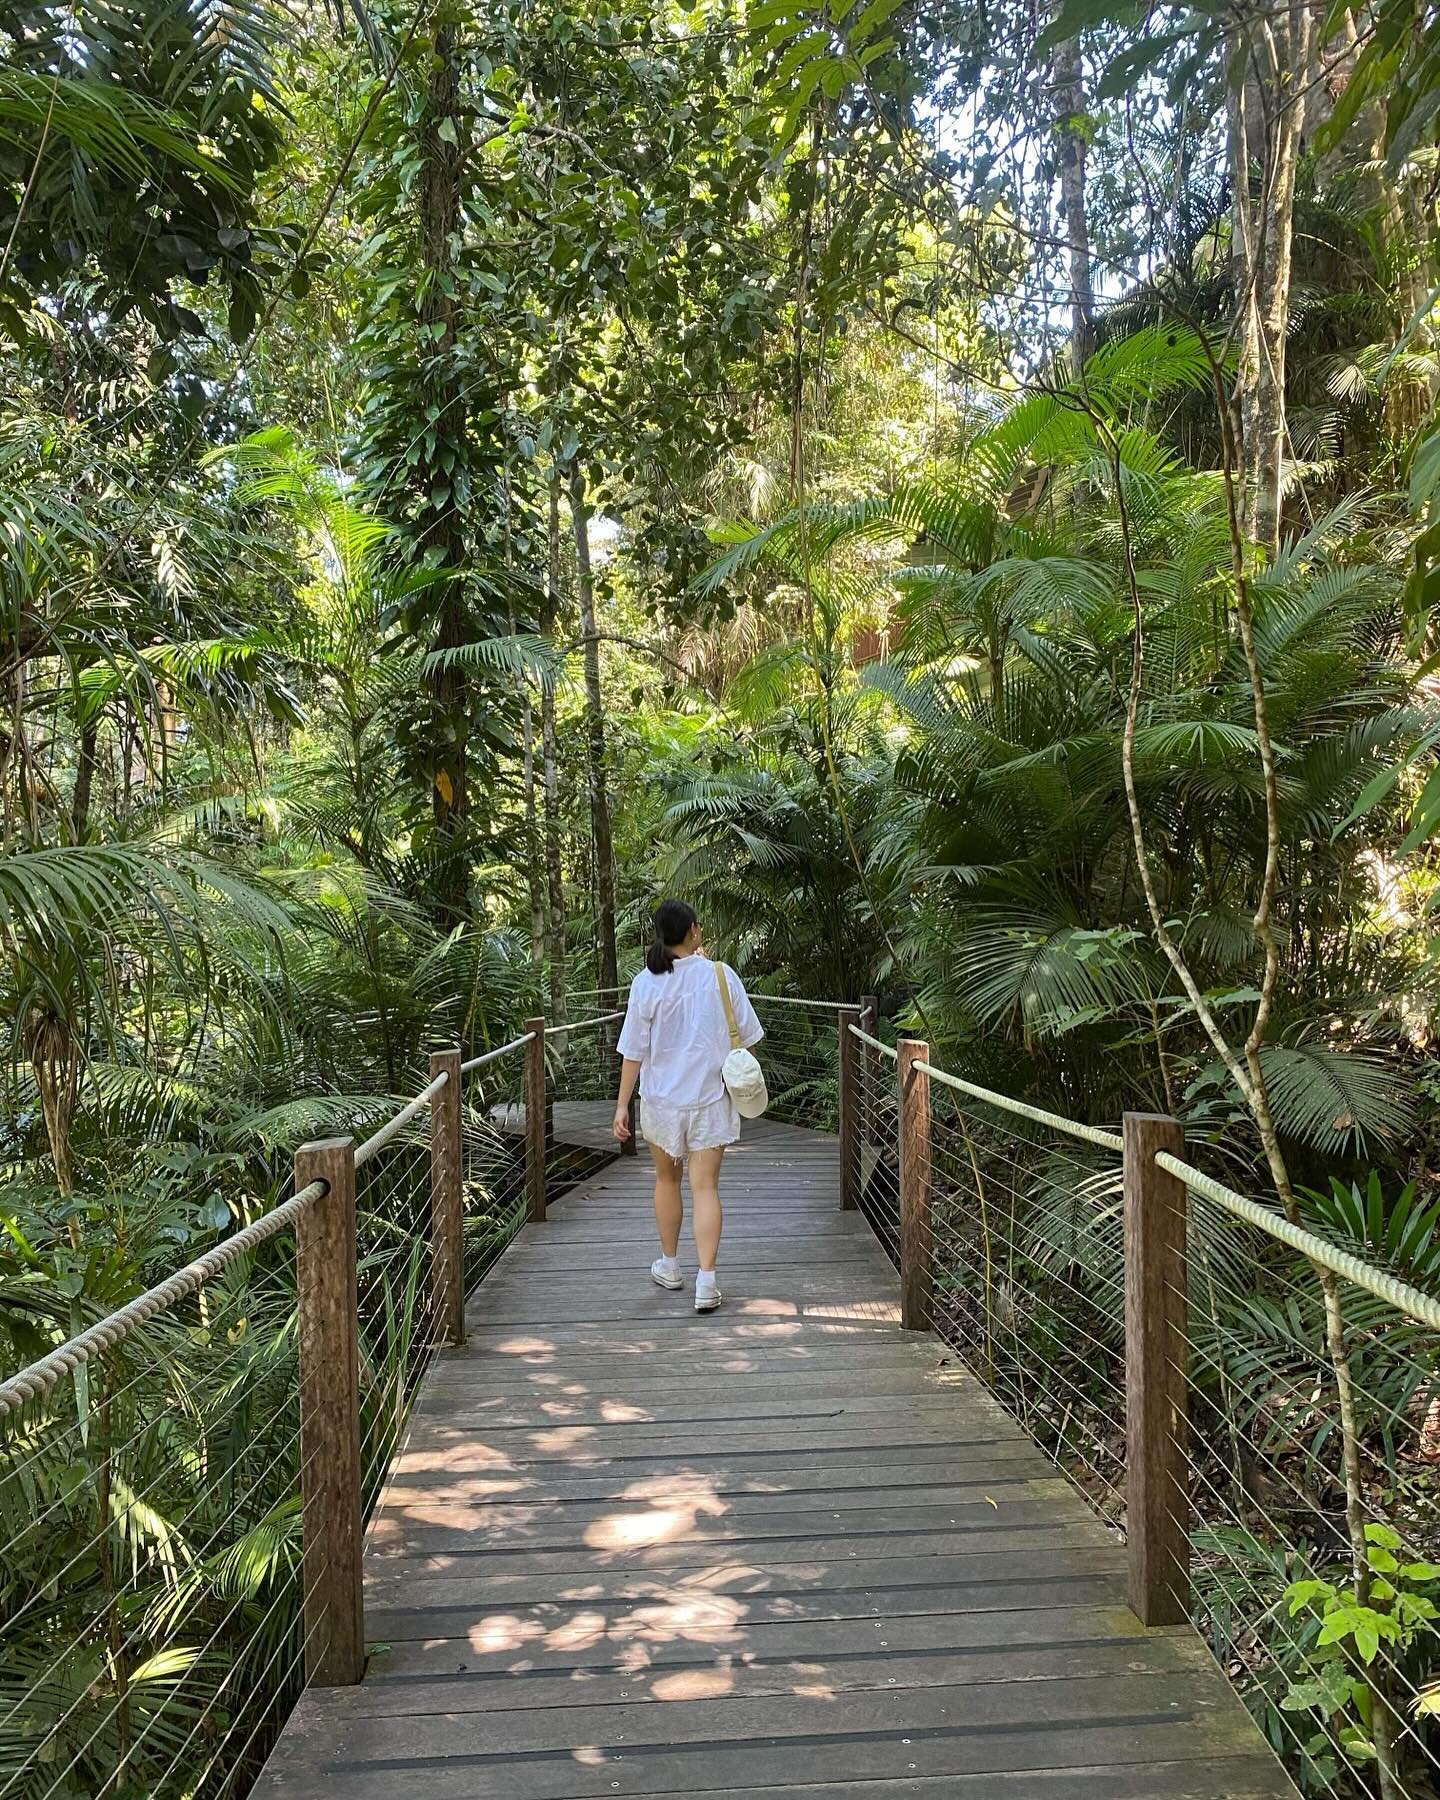 A glimpse into Tracy&rsquo;s post pandemic world ✨ &mdash; involving lots of travelling, slow living practices, work-from-cafe days, basking in nature and picking up new skills. 

In our Season 3 finale, we recently reflected on how our lives have ch